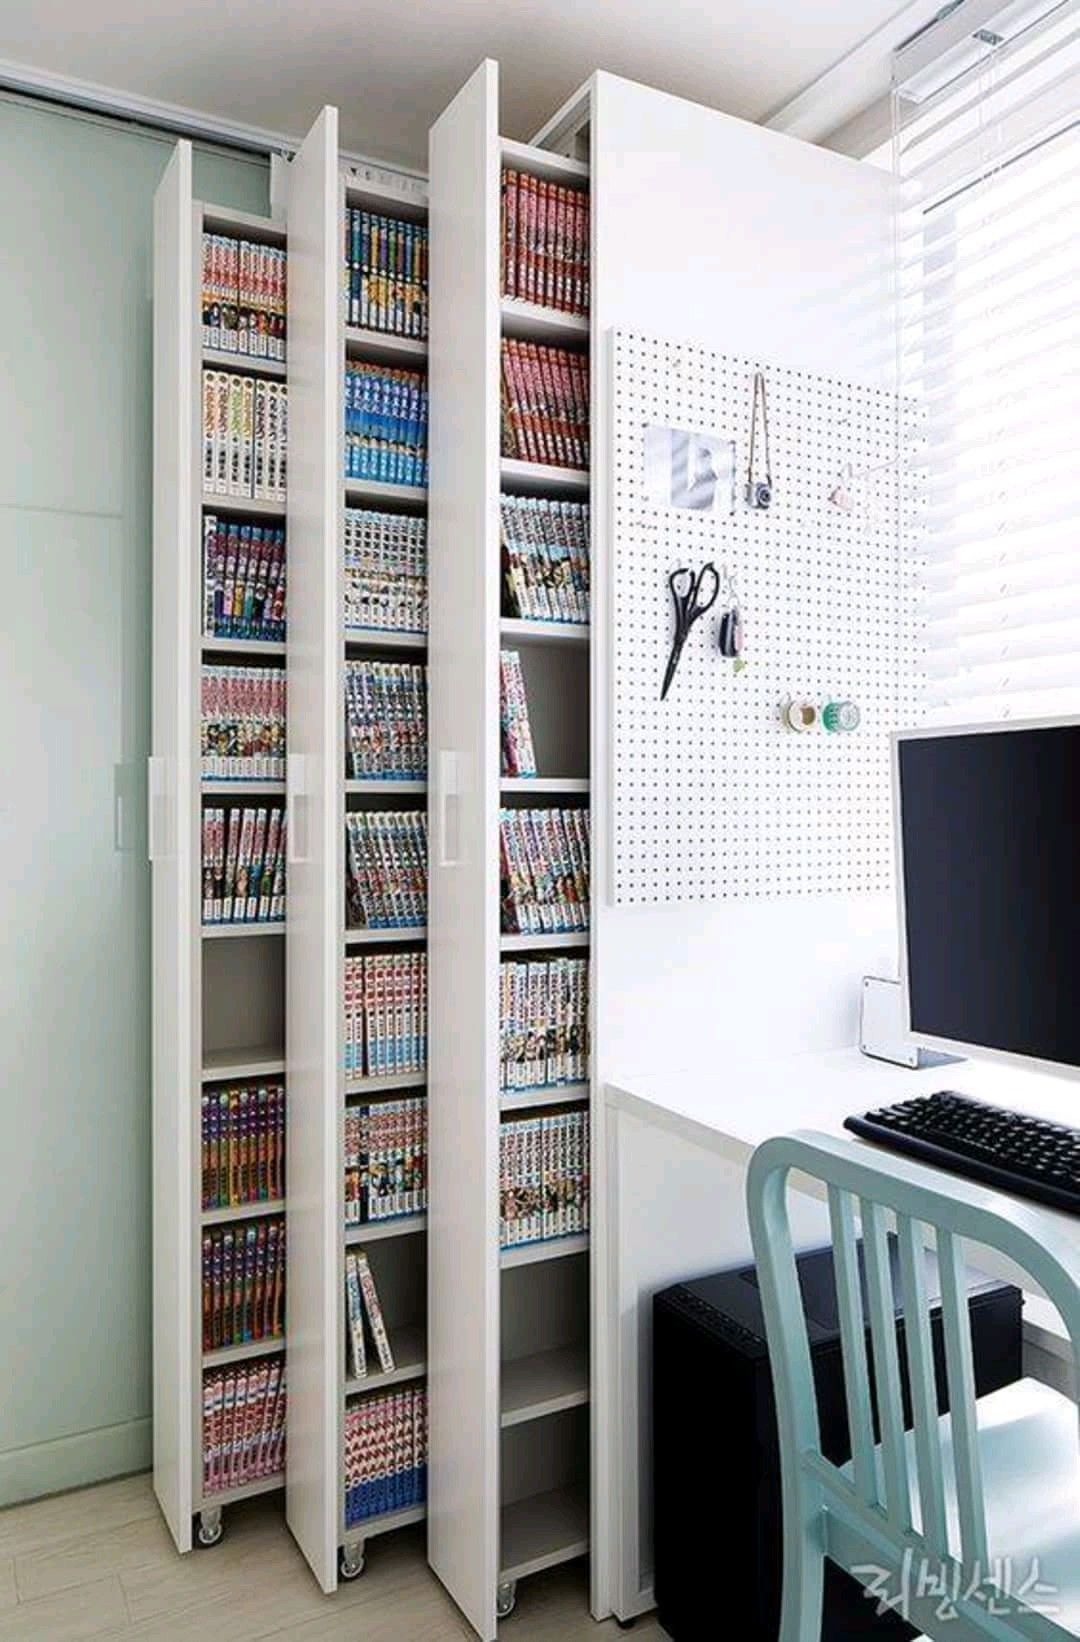 Innovative Ways to Organize Your DVD
Collection